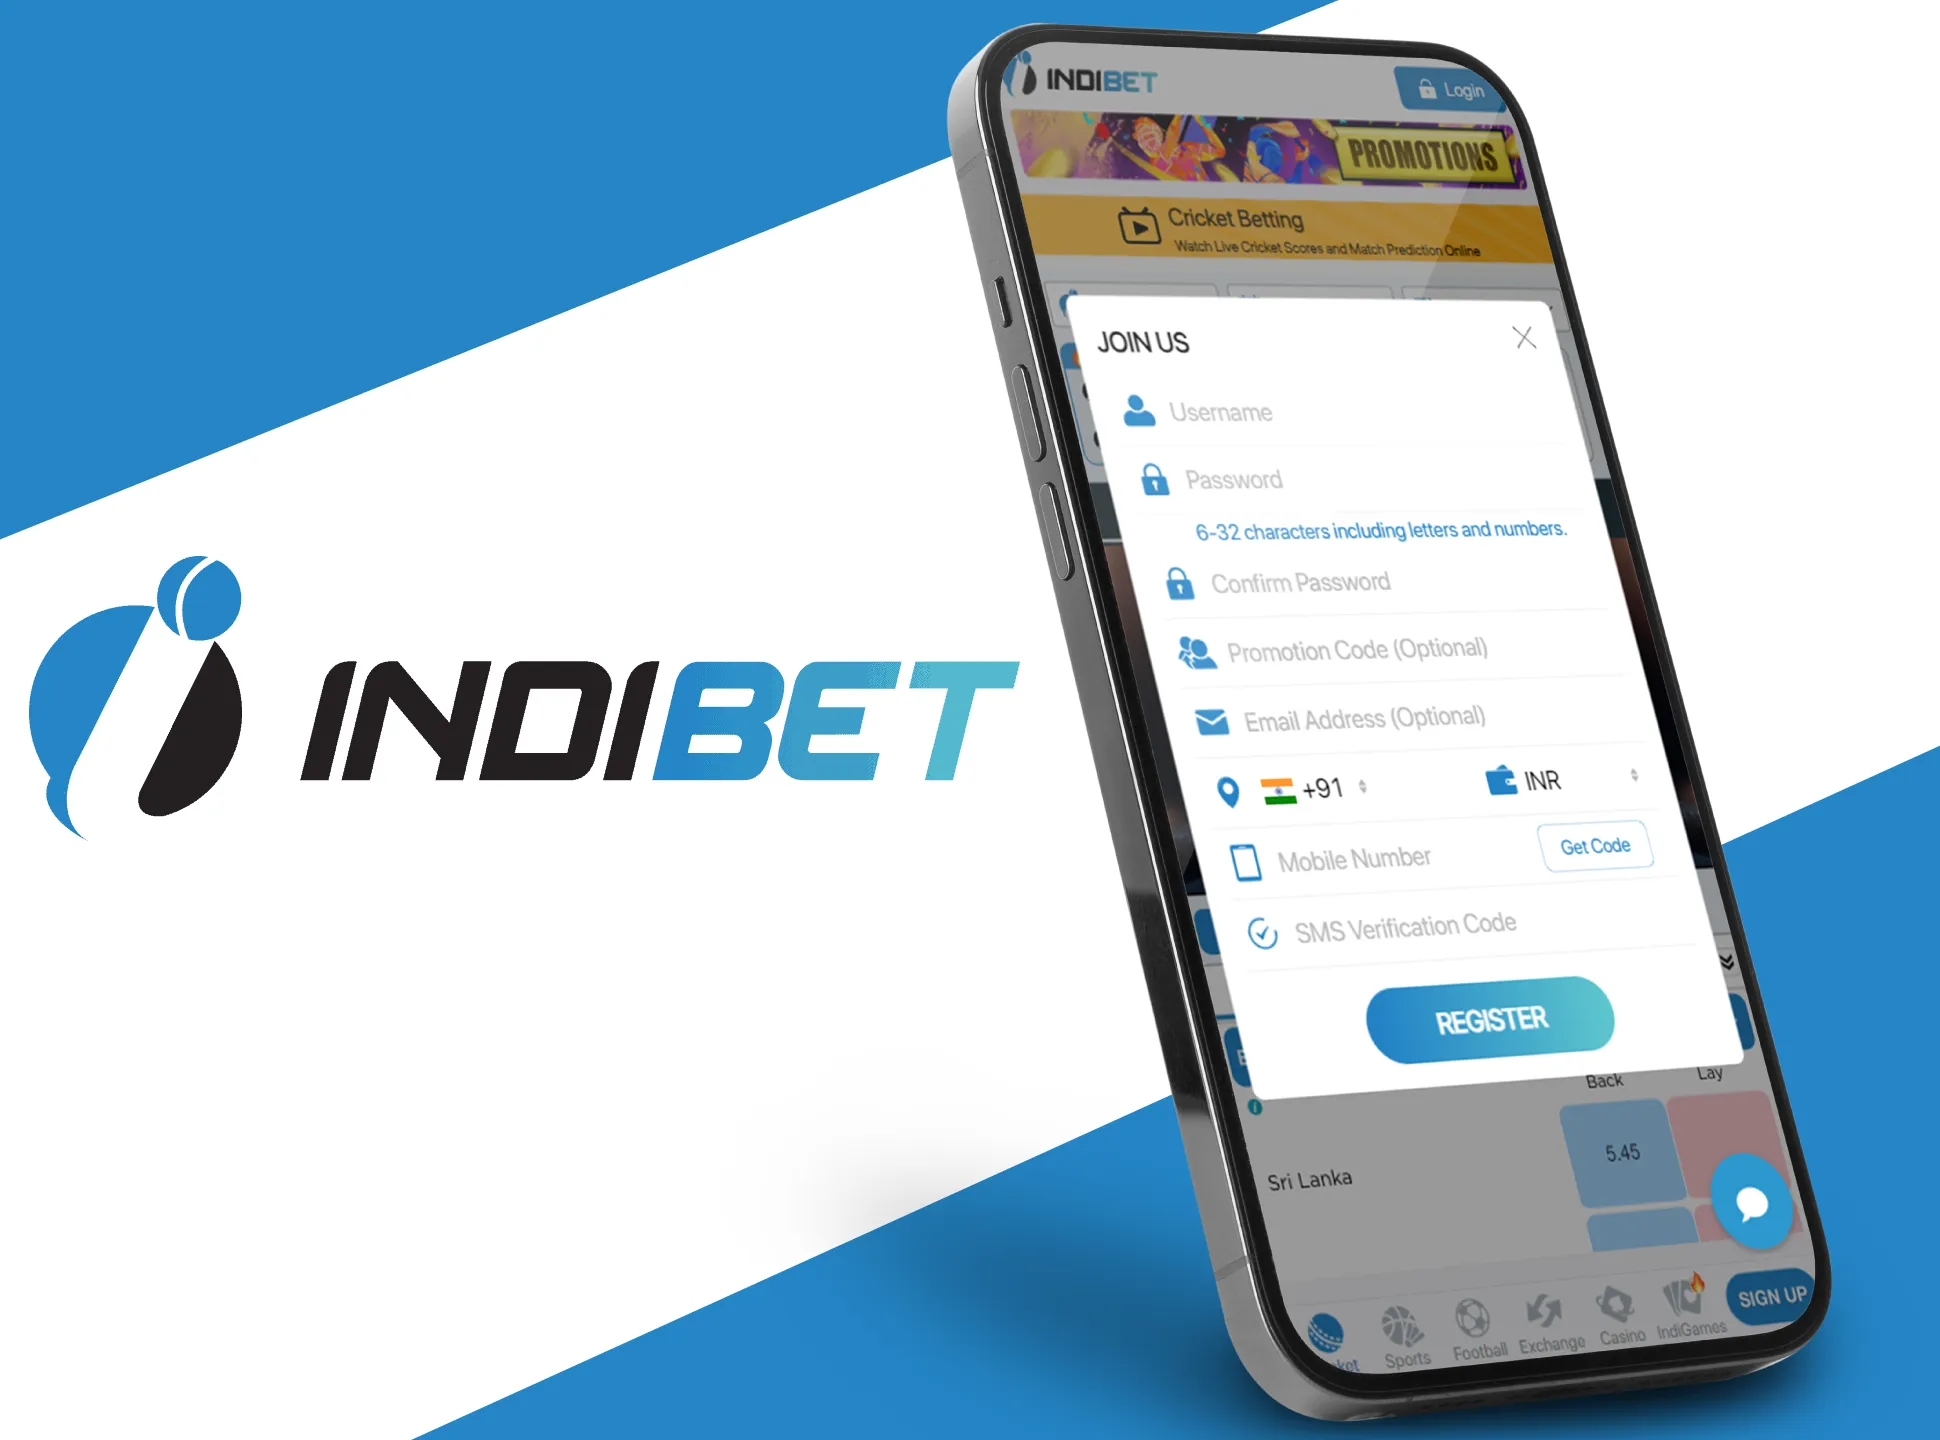 Register your own Indibet account just in two clicks.